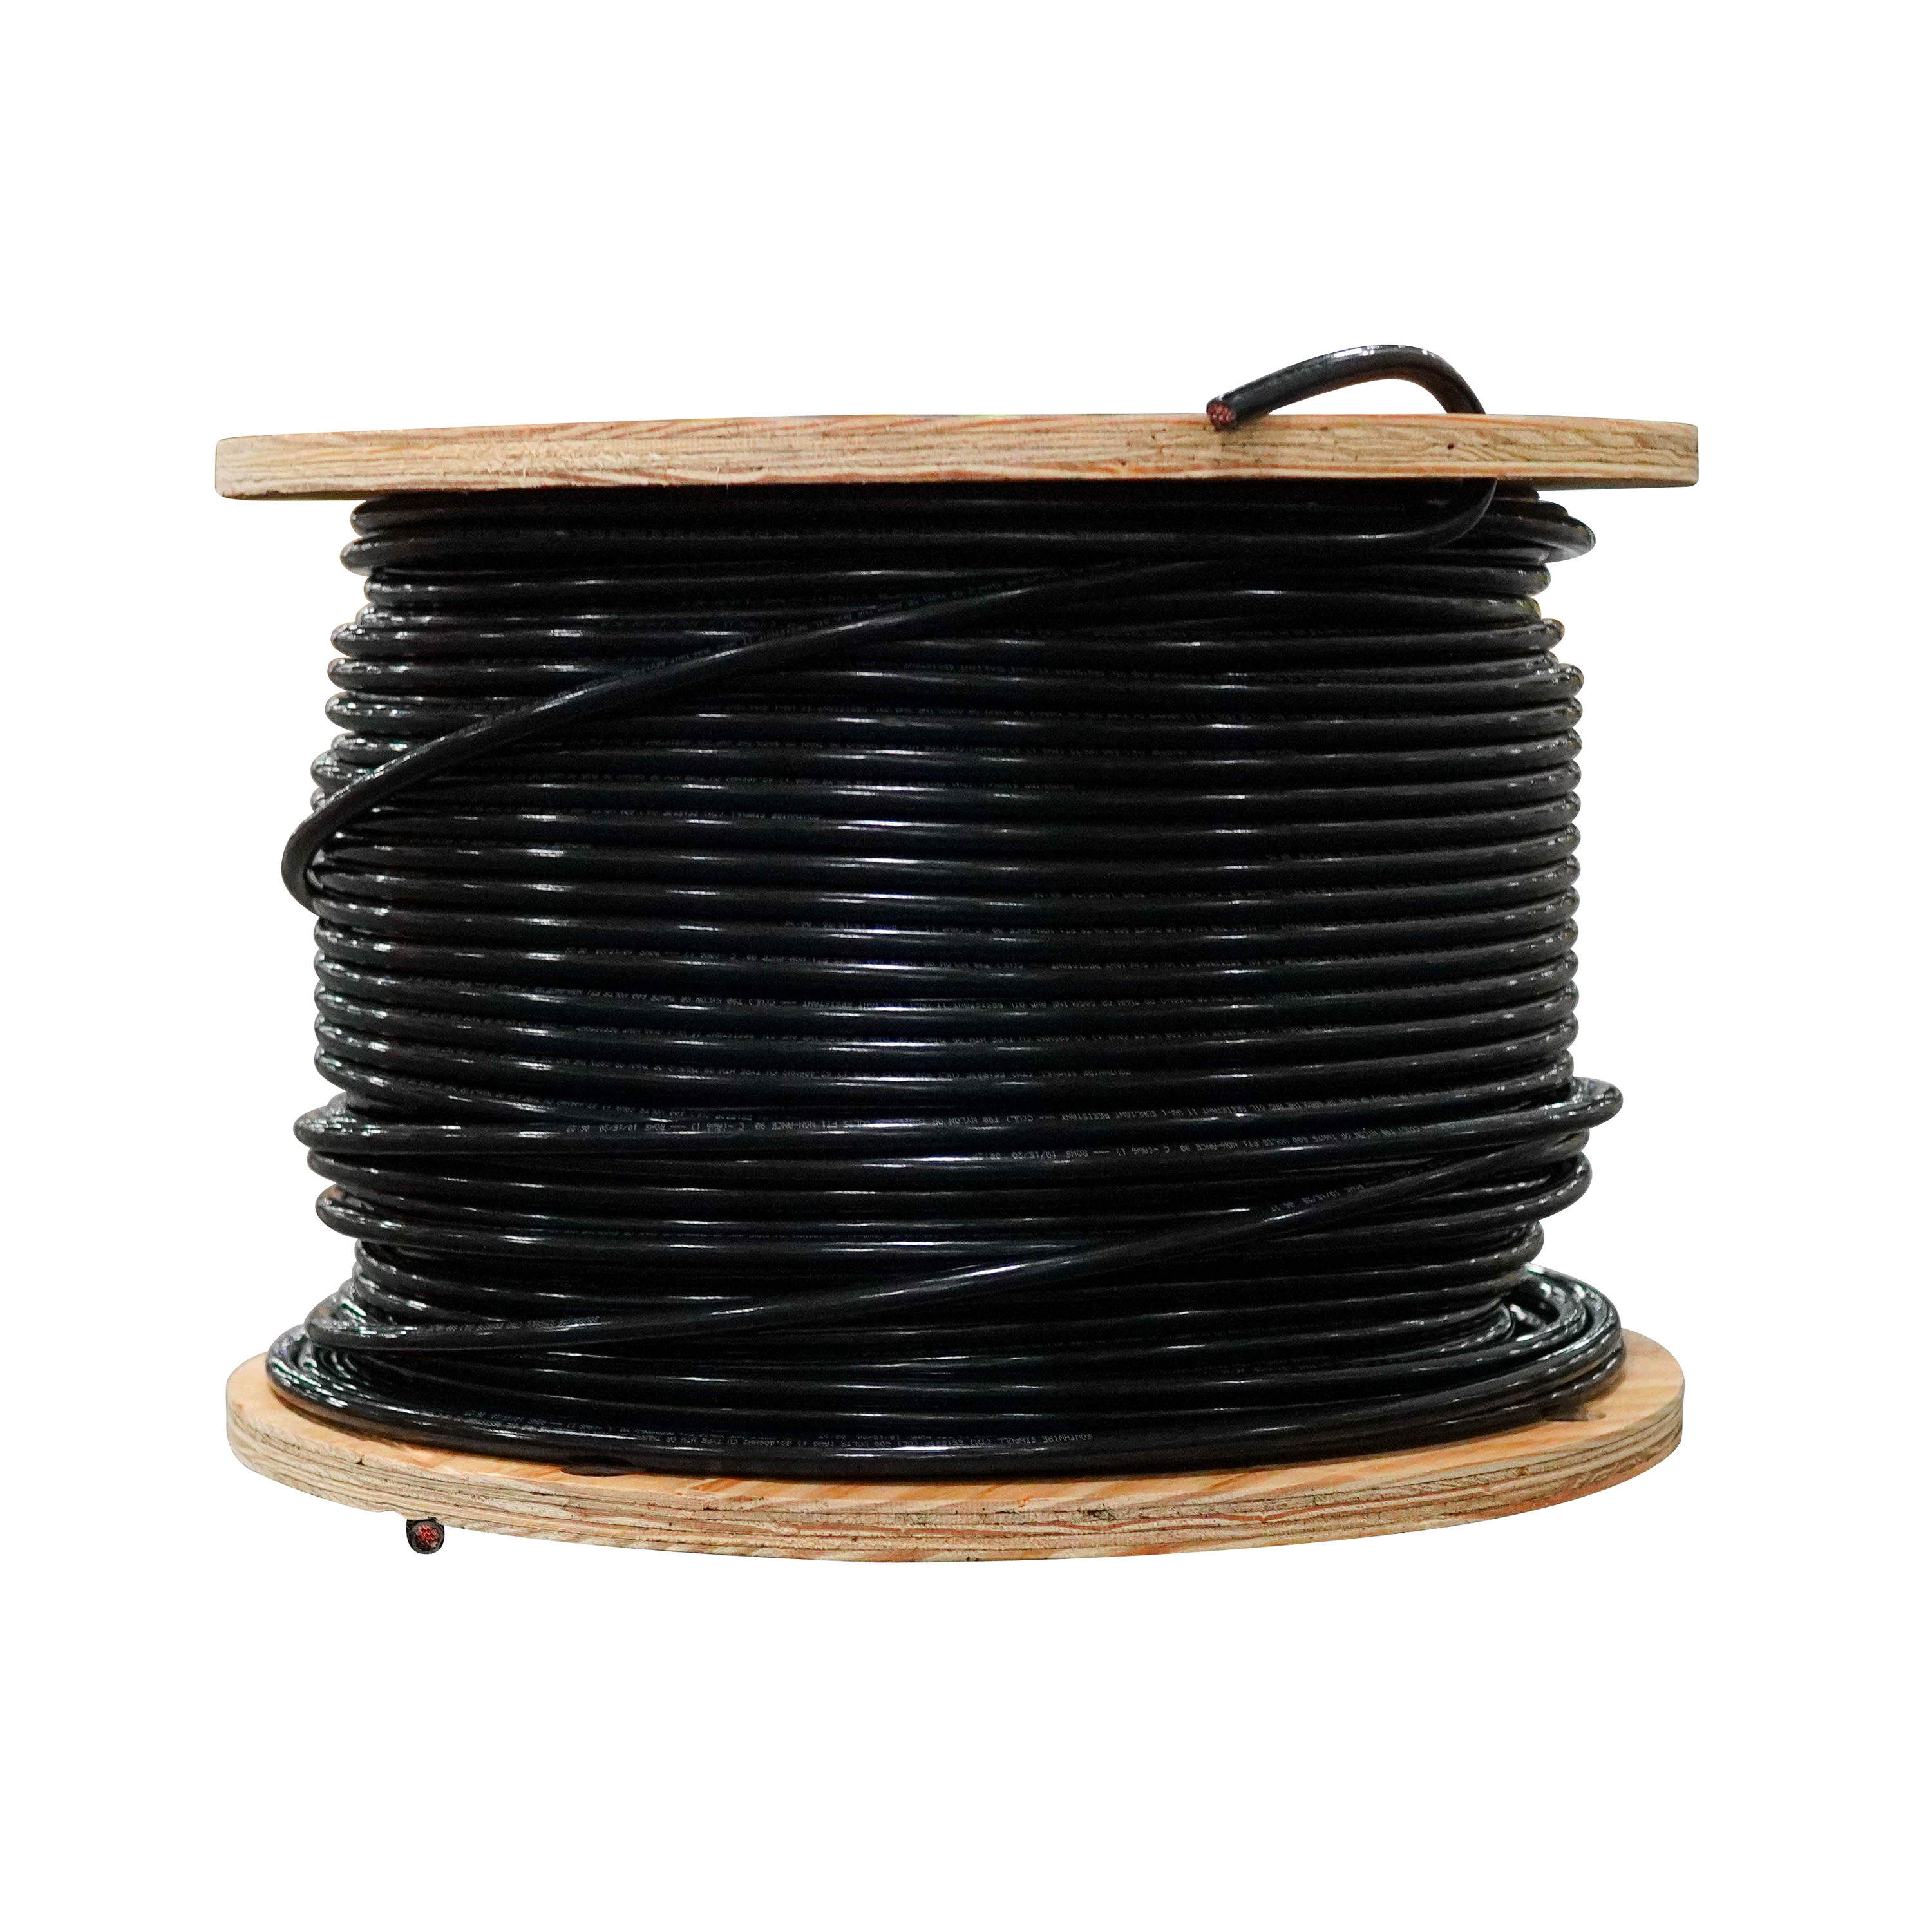 Southwire T90 12 AWG 150M Stranded Electrical Wire - Black